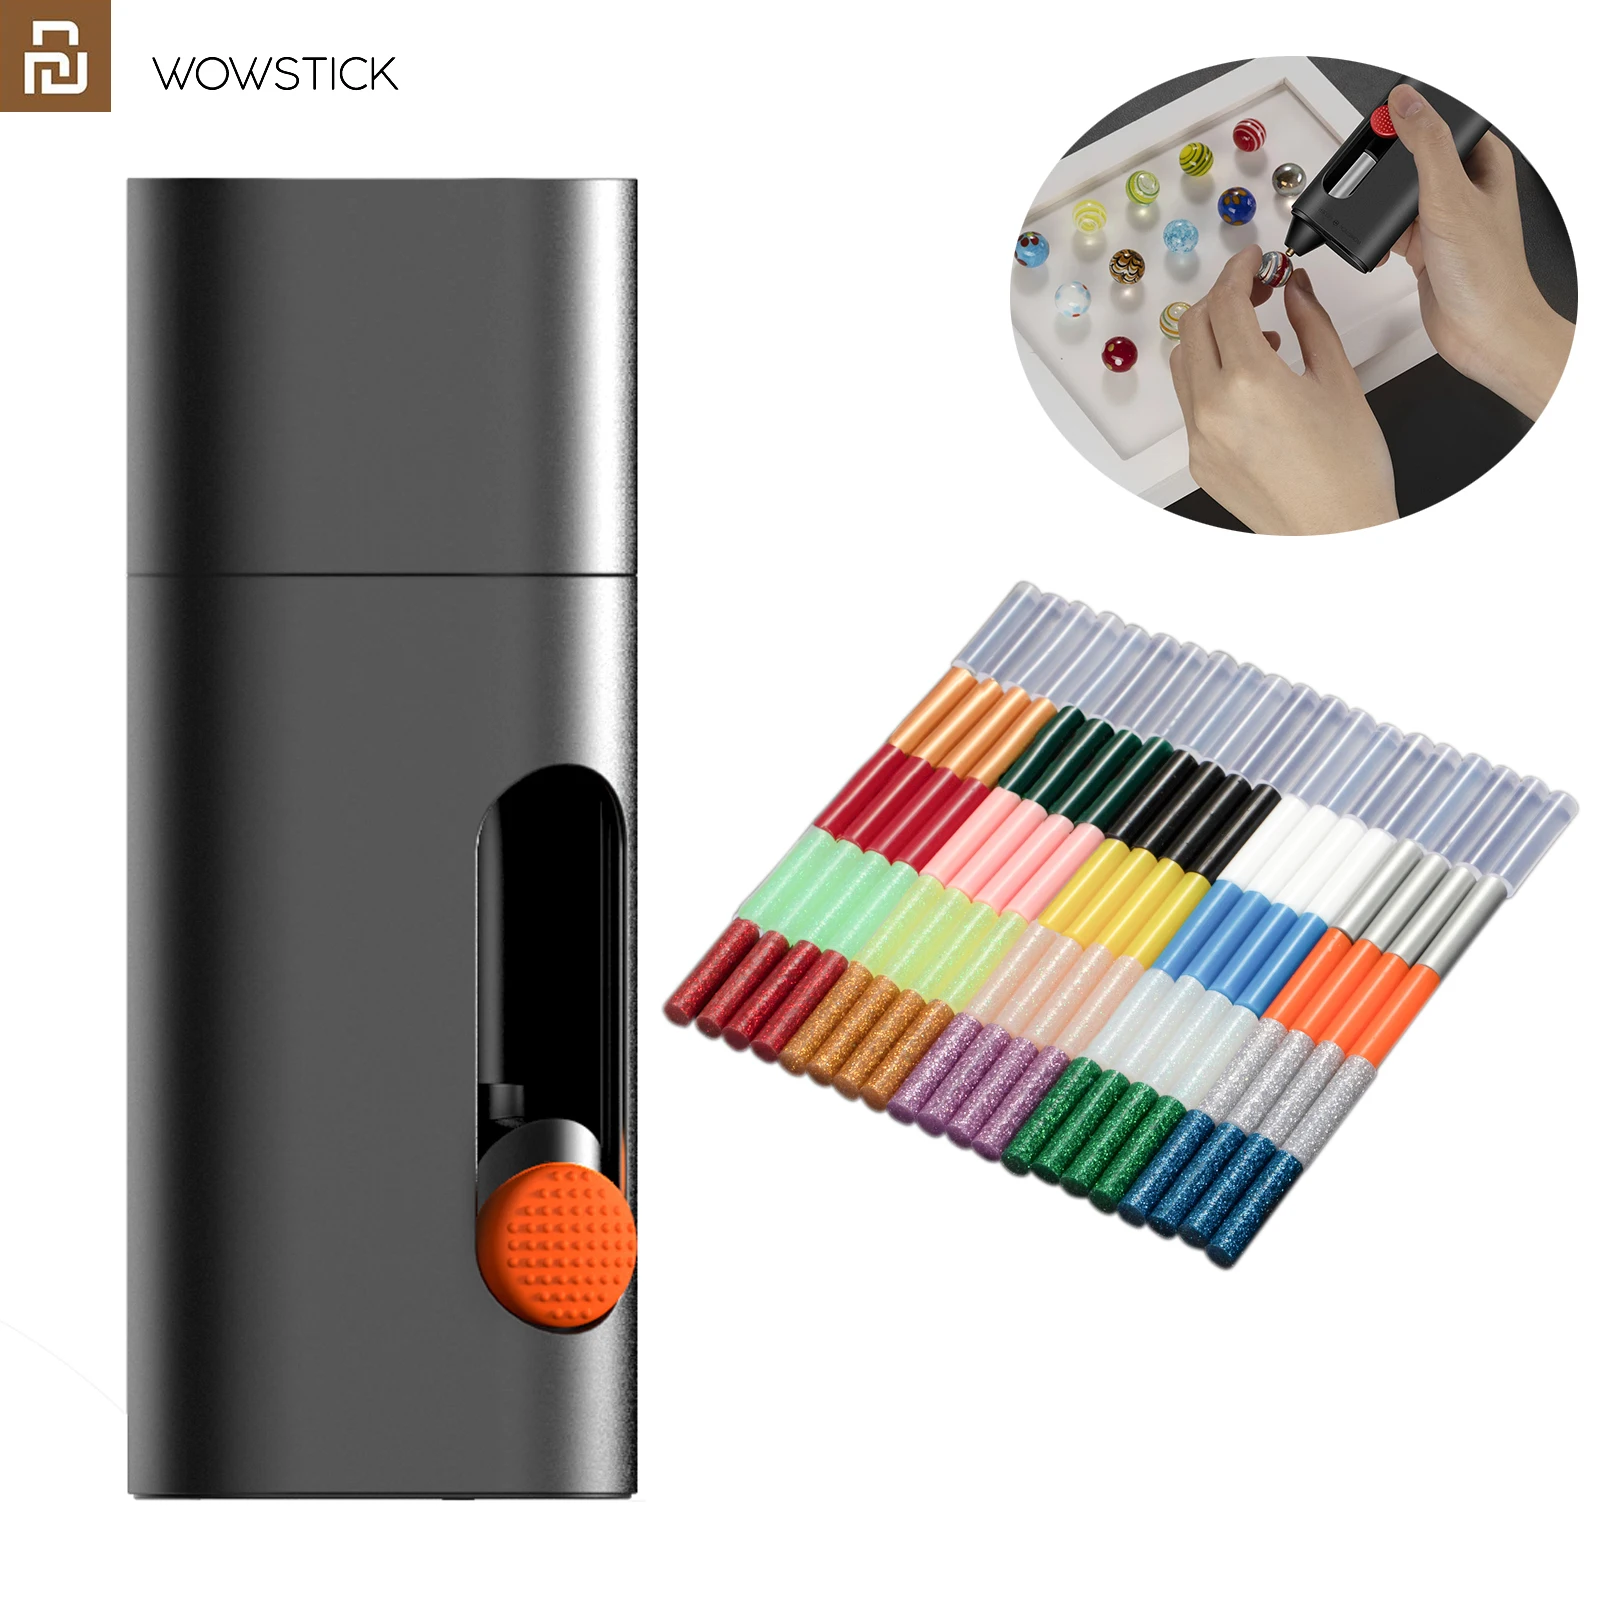 

Youpin Wowstick Electric Hot Melt Glue Pen Kits Type-C Rechargeable Cordless DIY Arts Crafts Projects Sealing and Quick Repairs